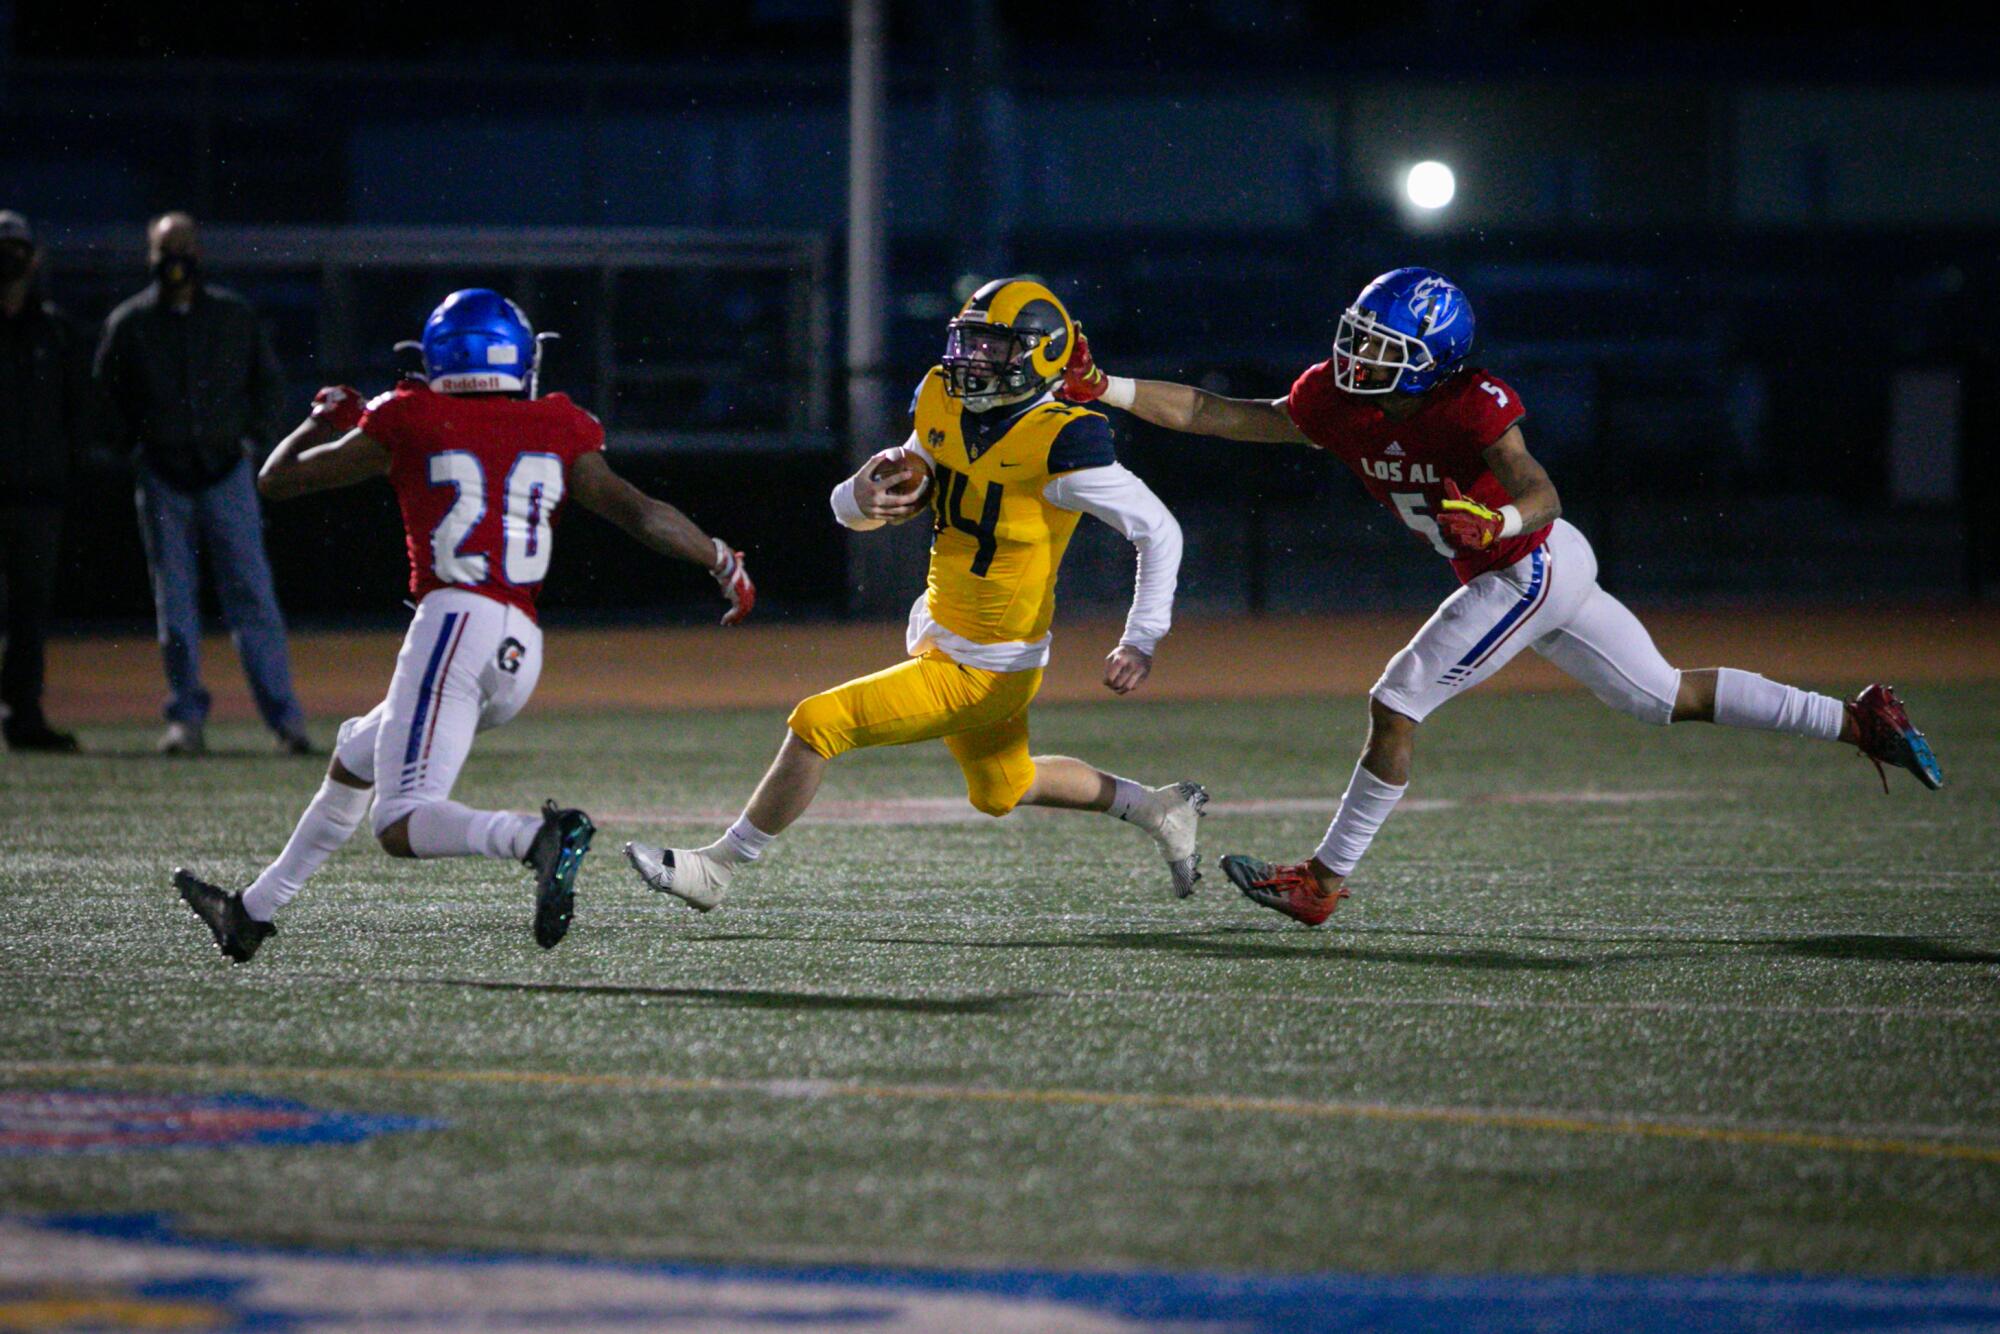 Los Alamitos players close in on Millikan quarterback Will Madonna as he carries the ball.